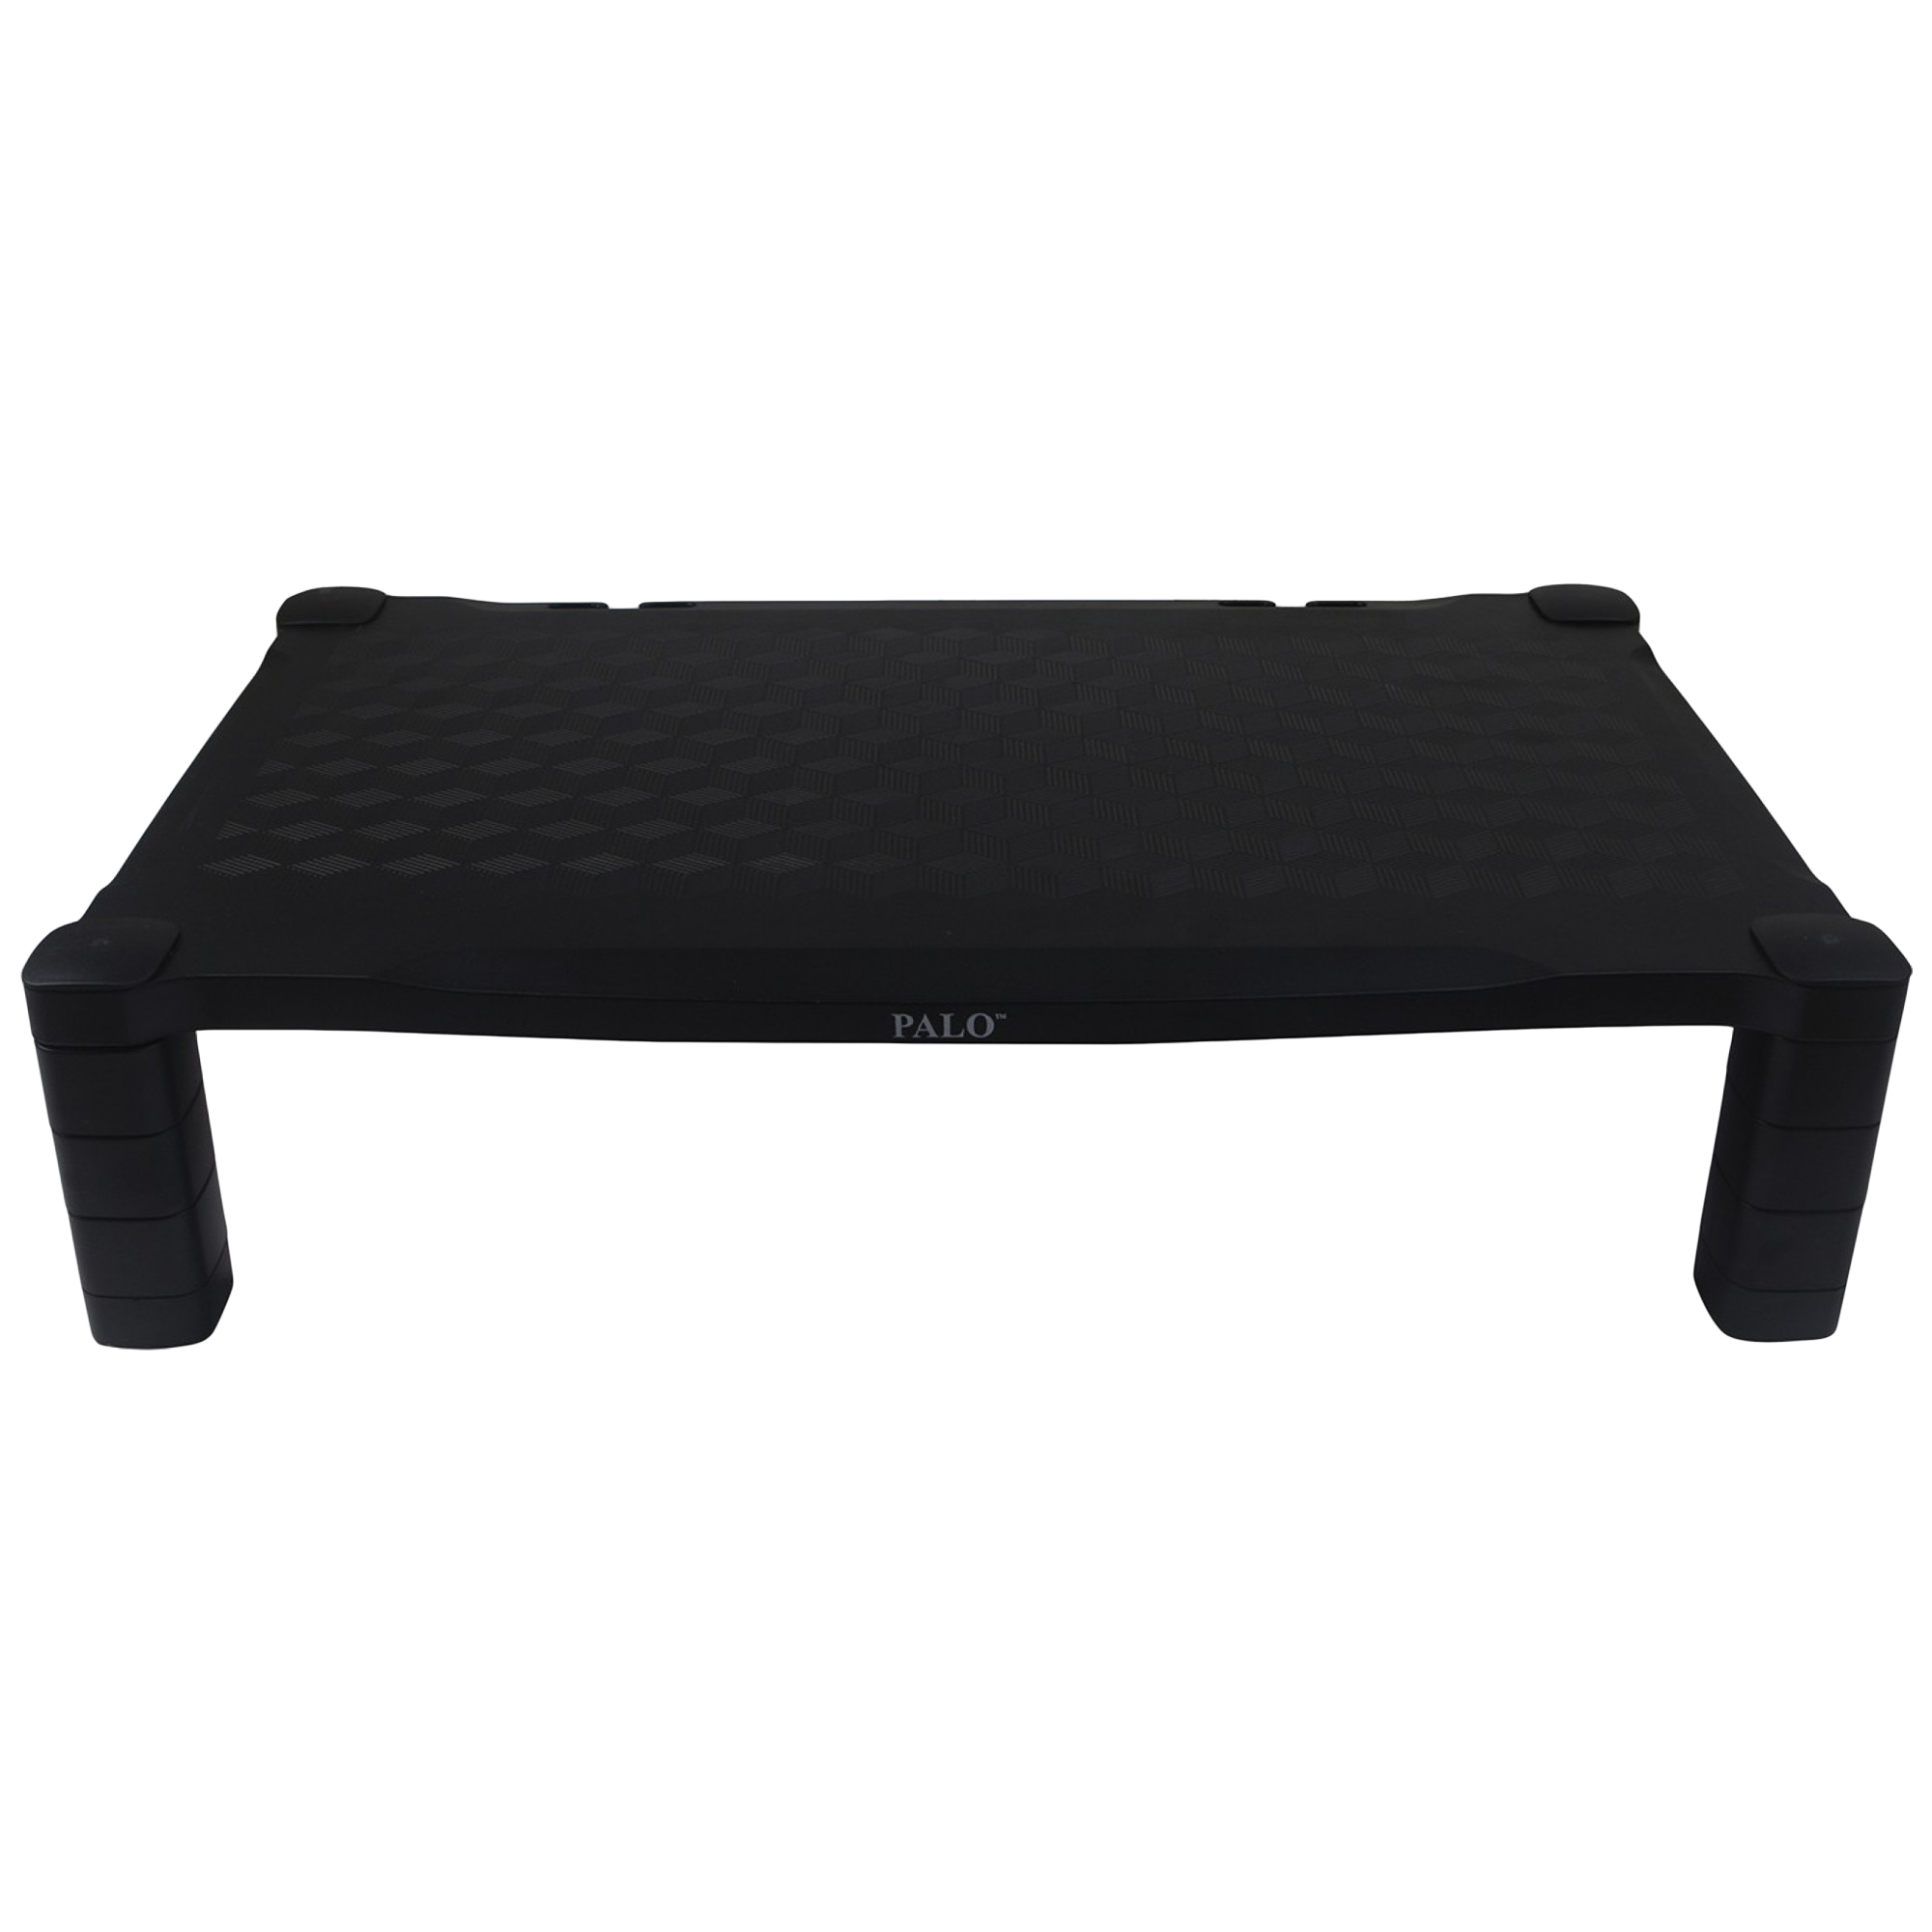 Palo PALO005 Monitor Stand For Monitor and Printer (Adjustable Height, Kanfa262, Black)_1